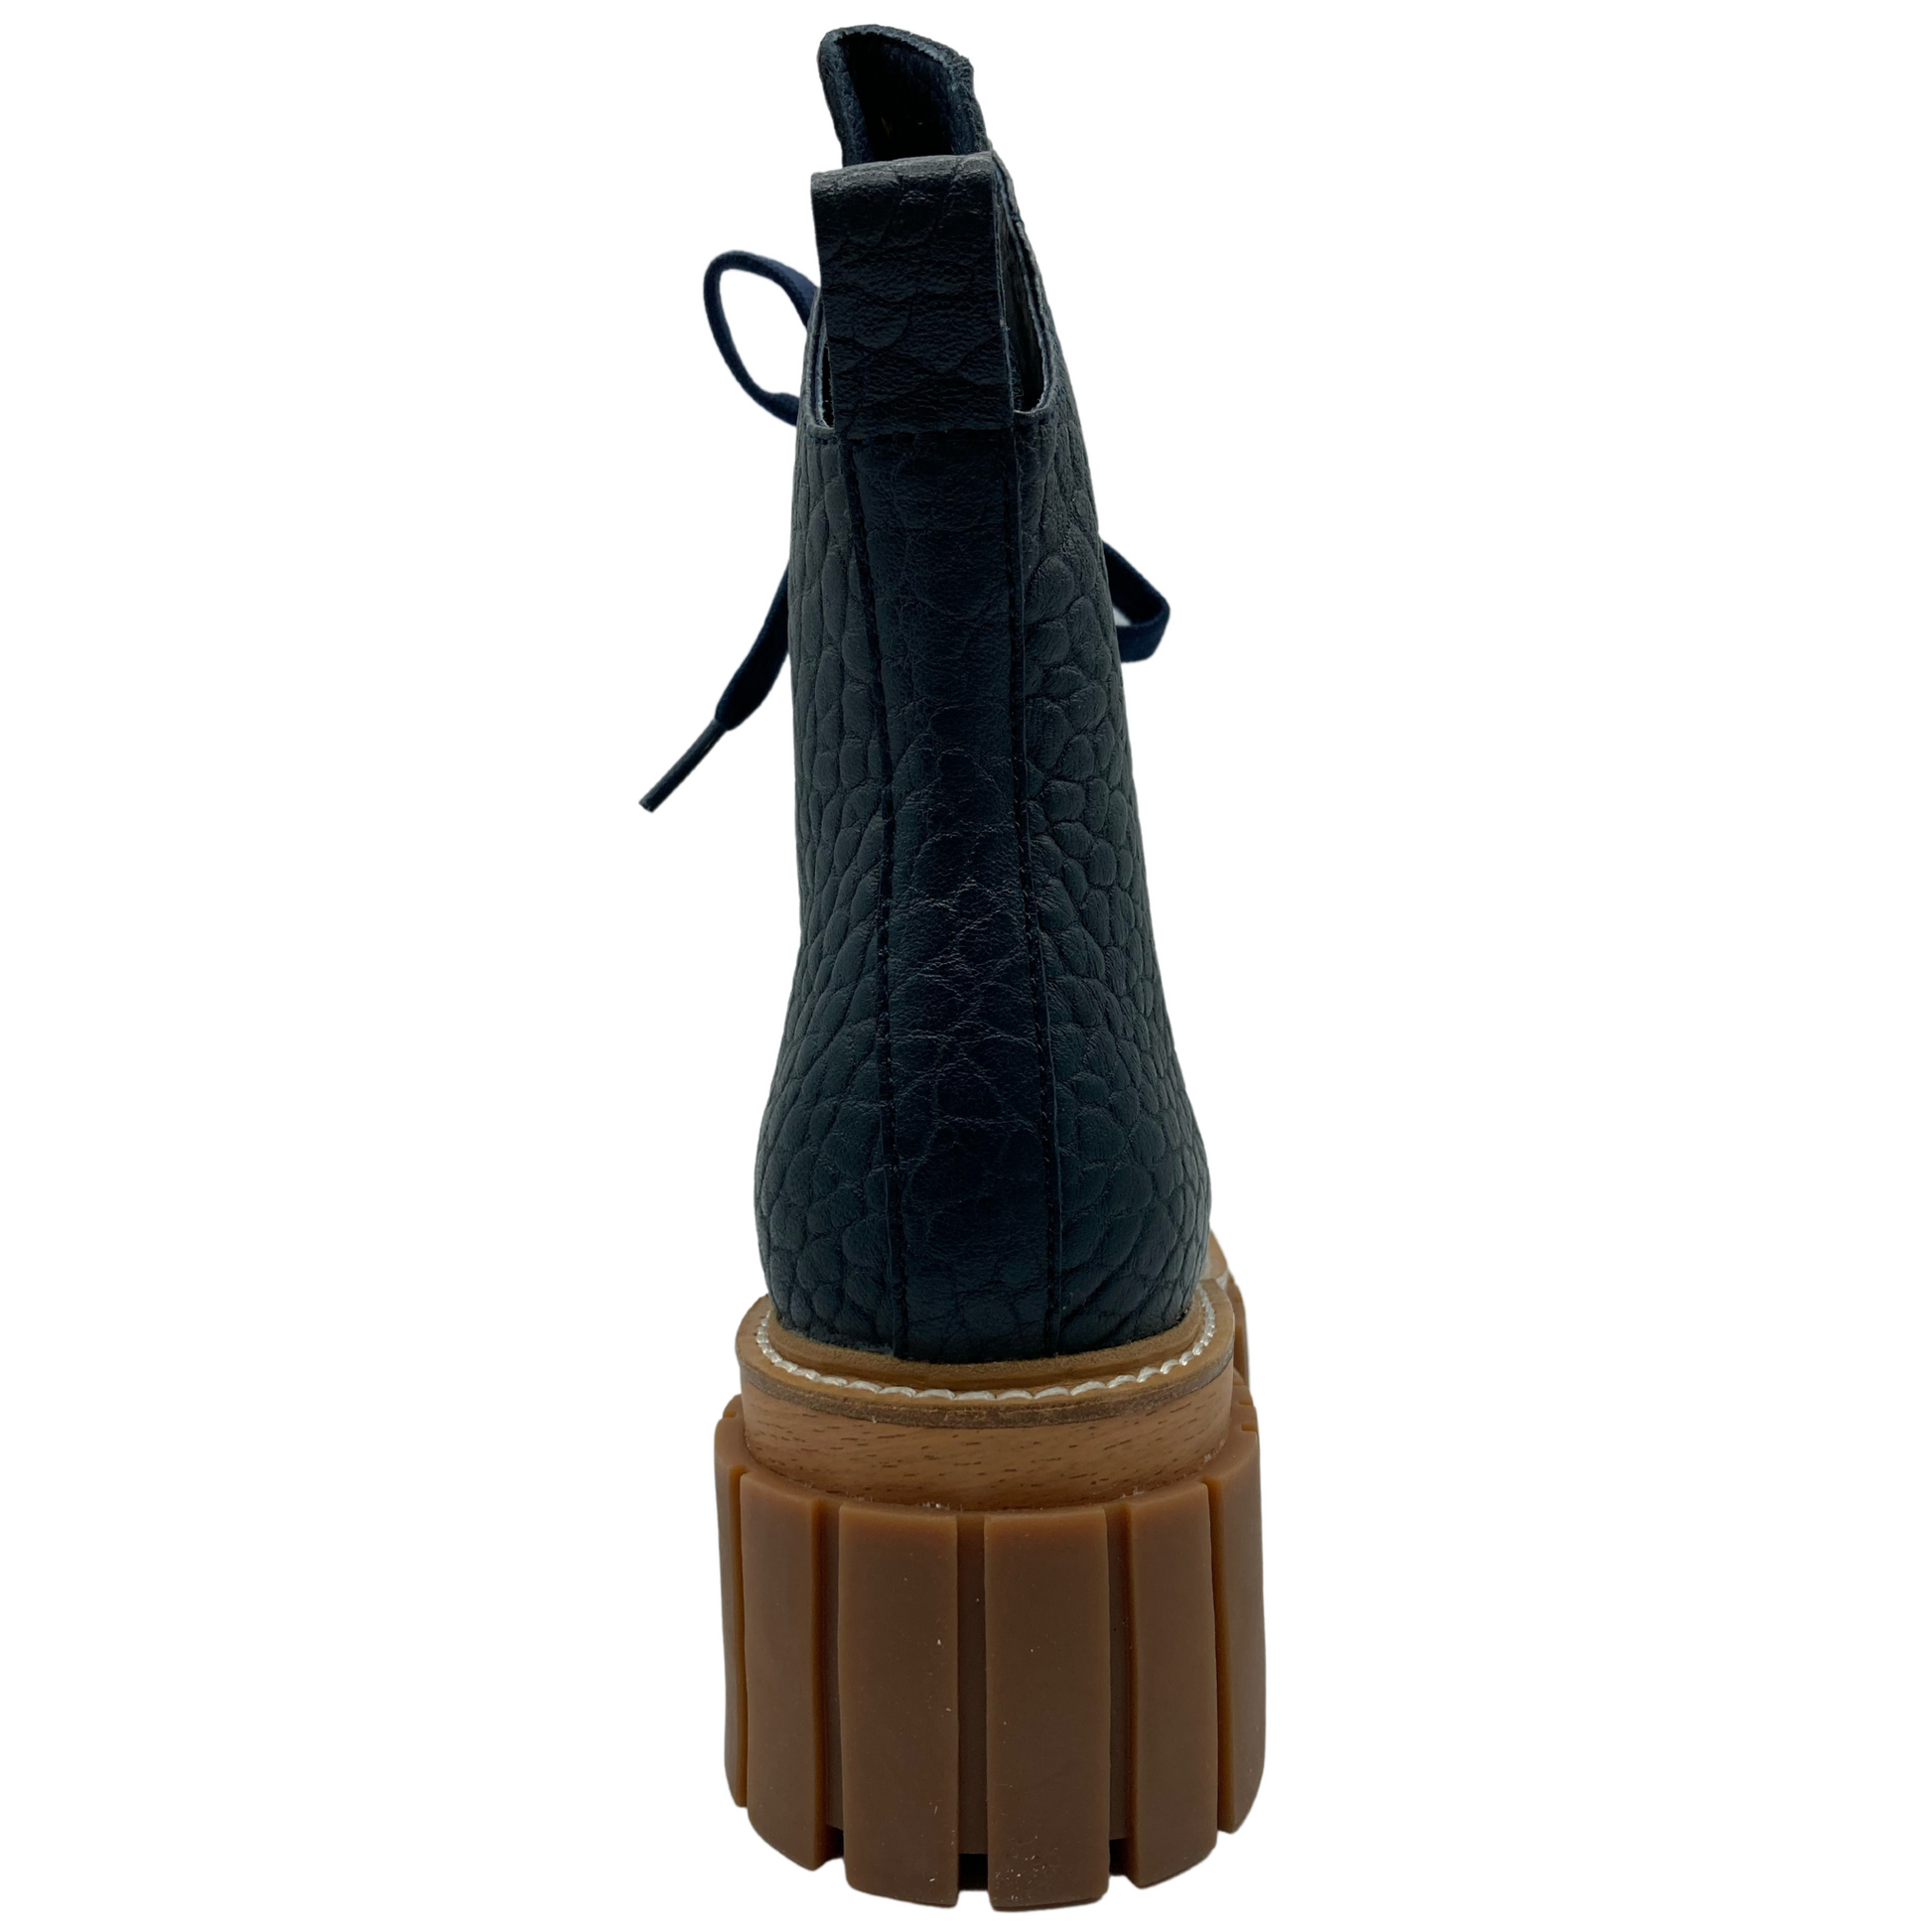 Heel view of textured navy leather boot with chunky brown rubber outsole